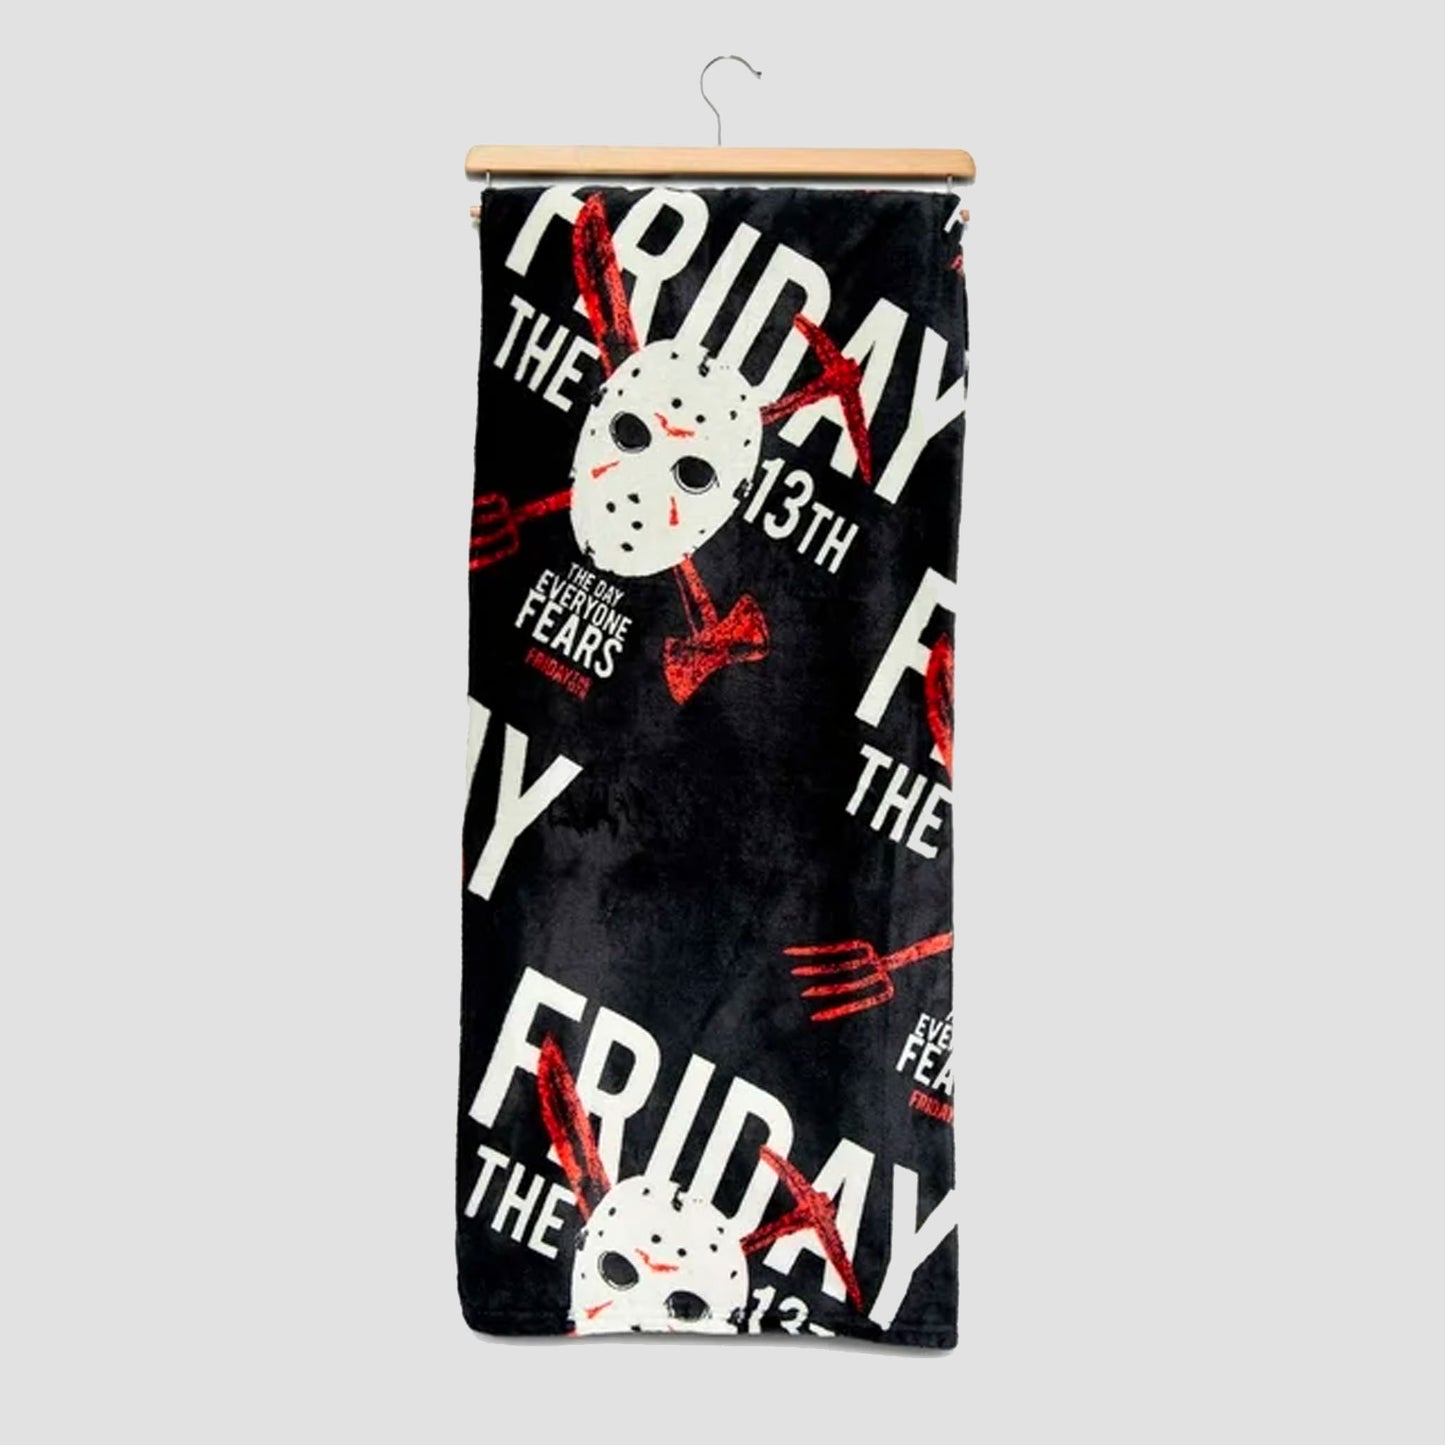 Friday the 13th Friday Fears Warner Bros Silk Touch Throw Blanket, 50 x 70  inches Black 